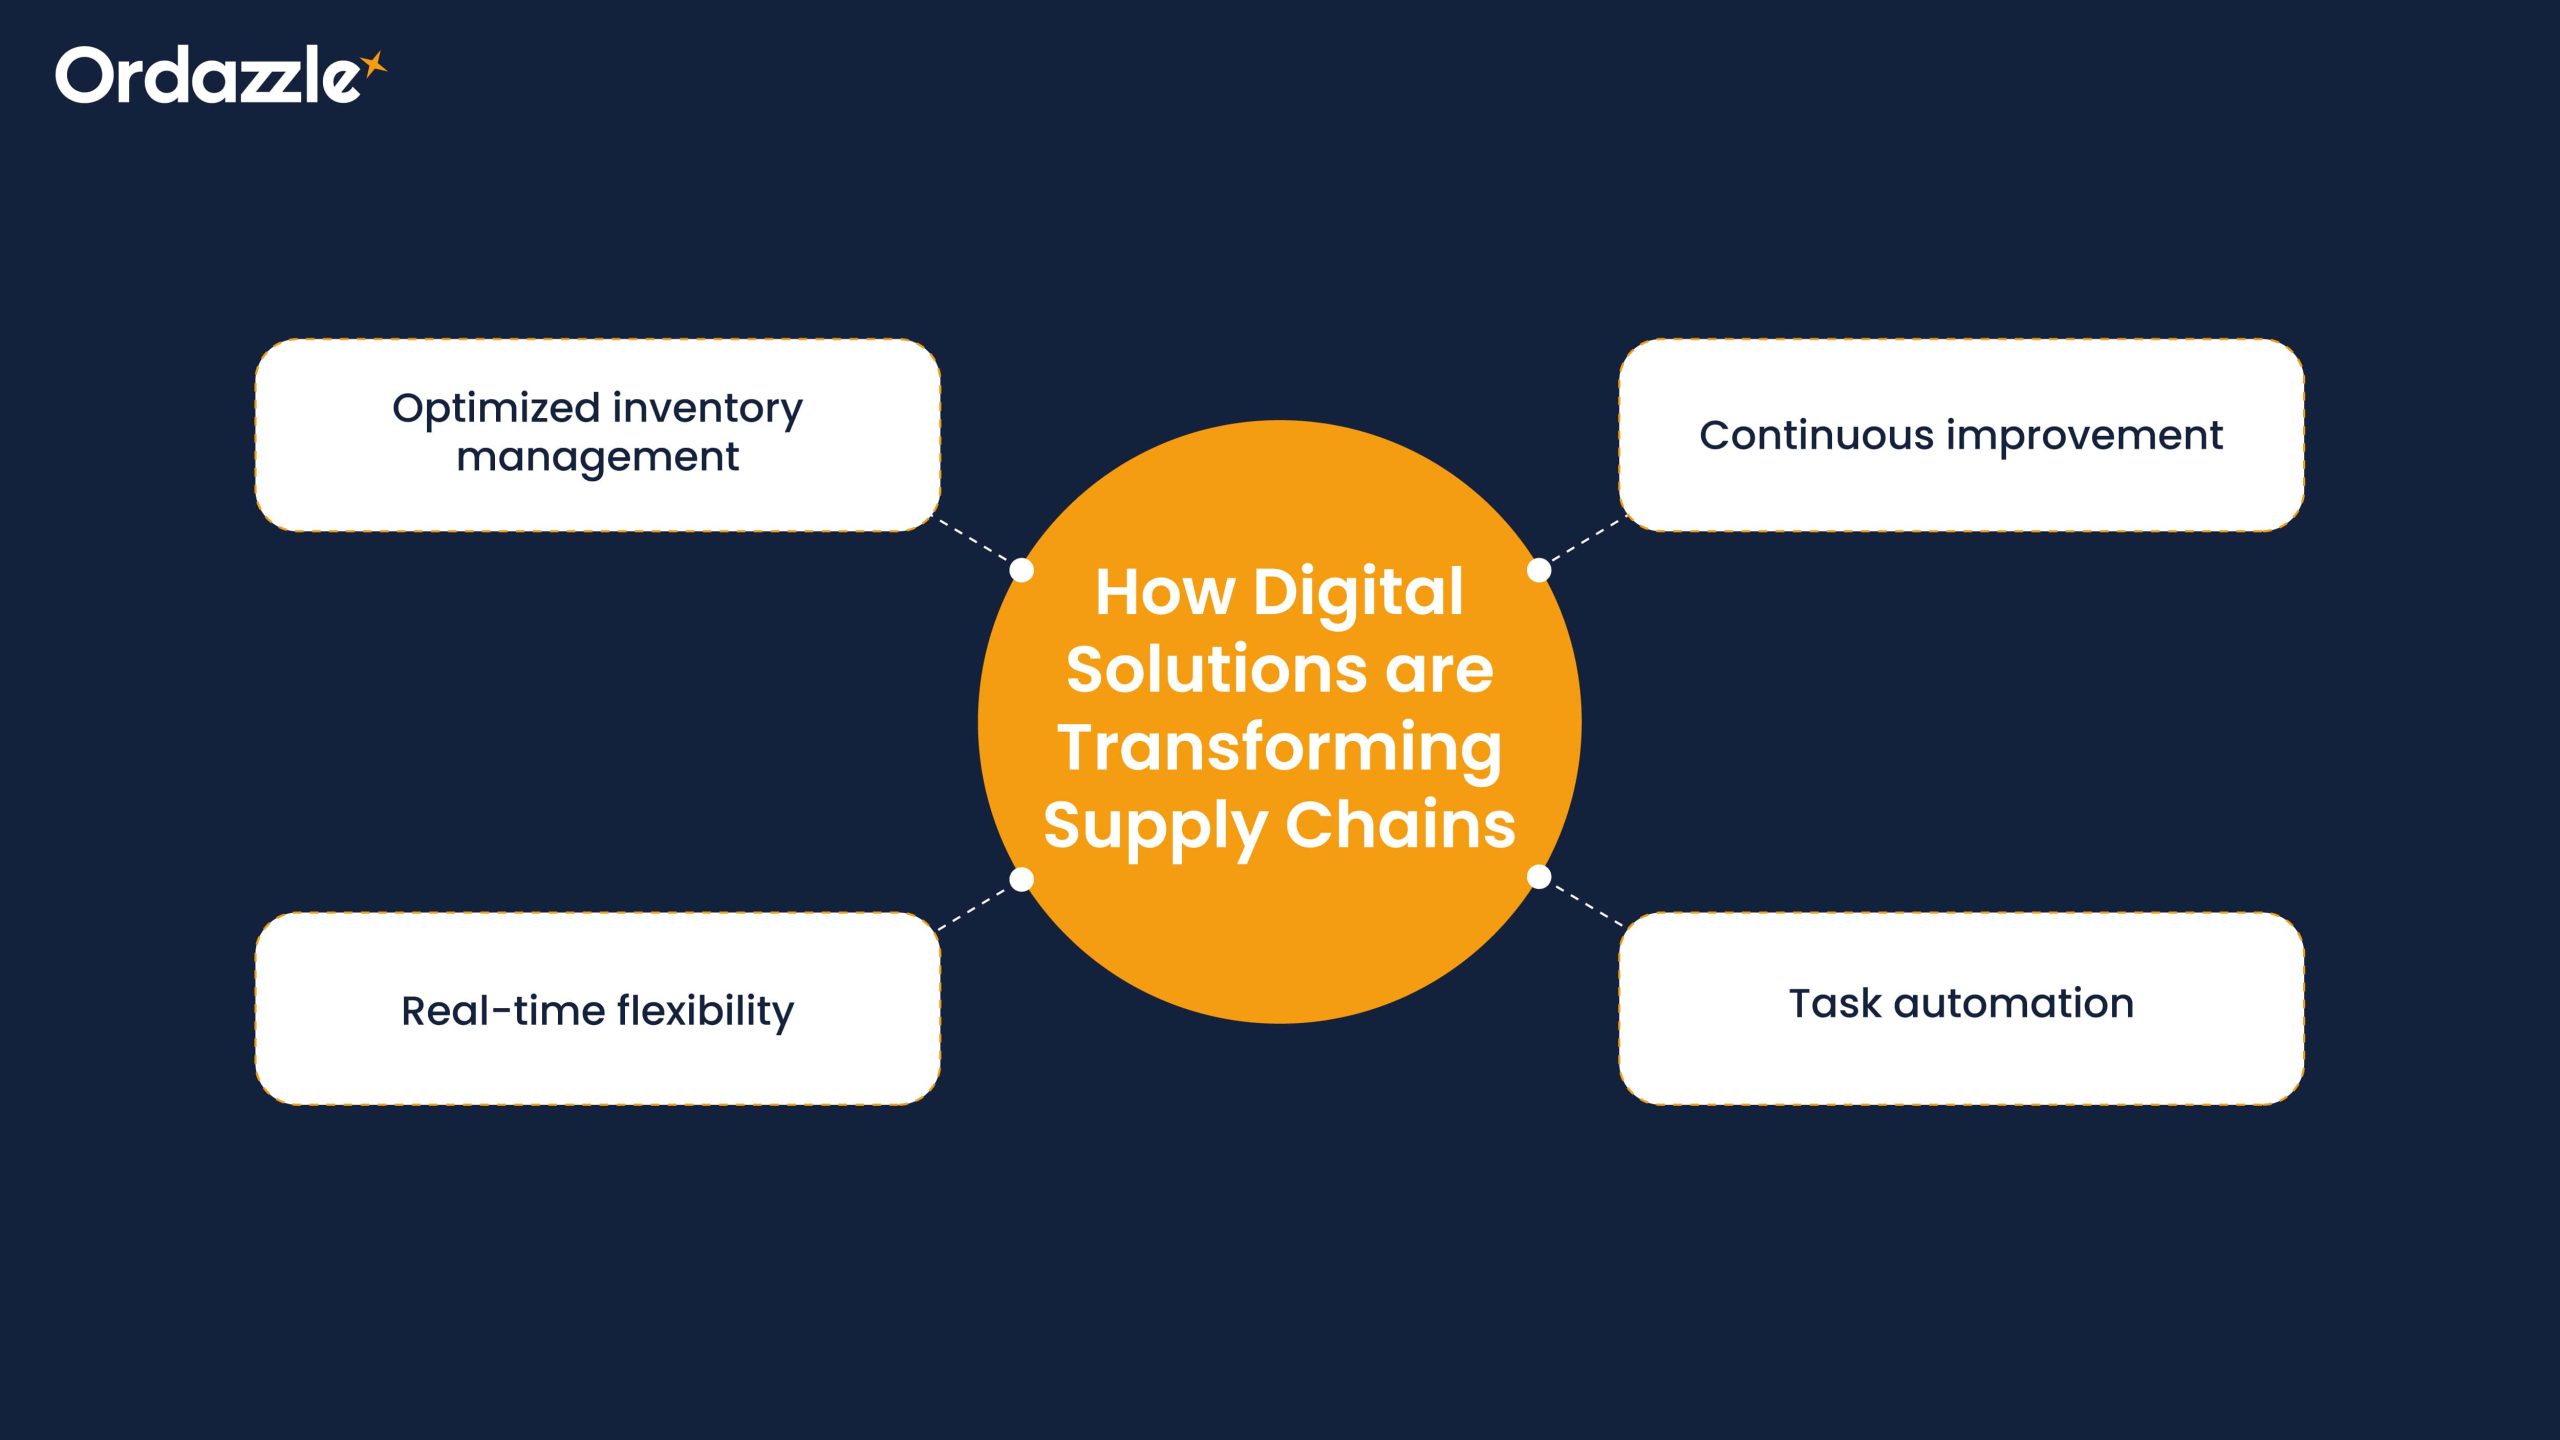 Digital Solutions are Transforming Supply Chains